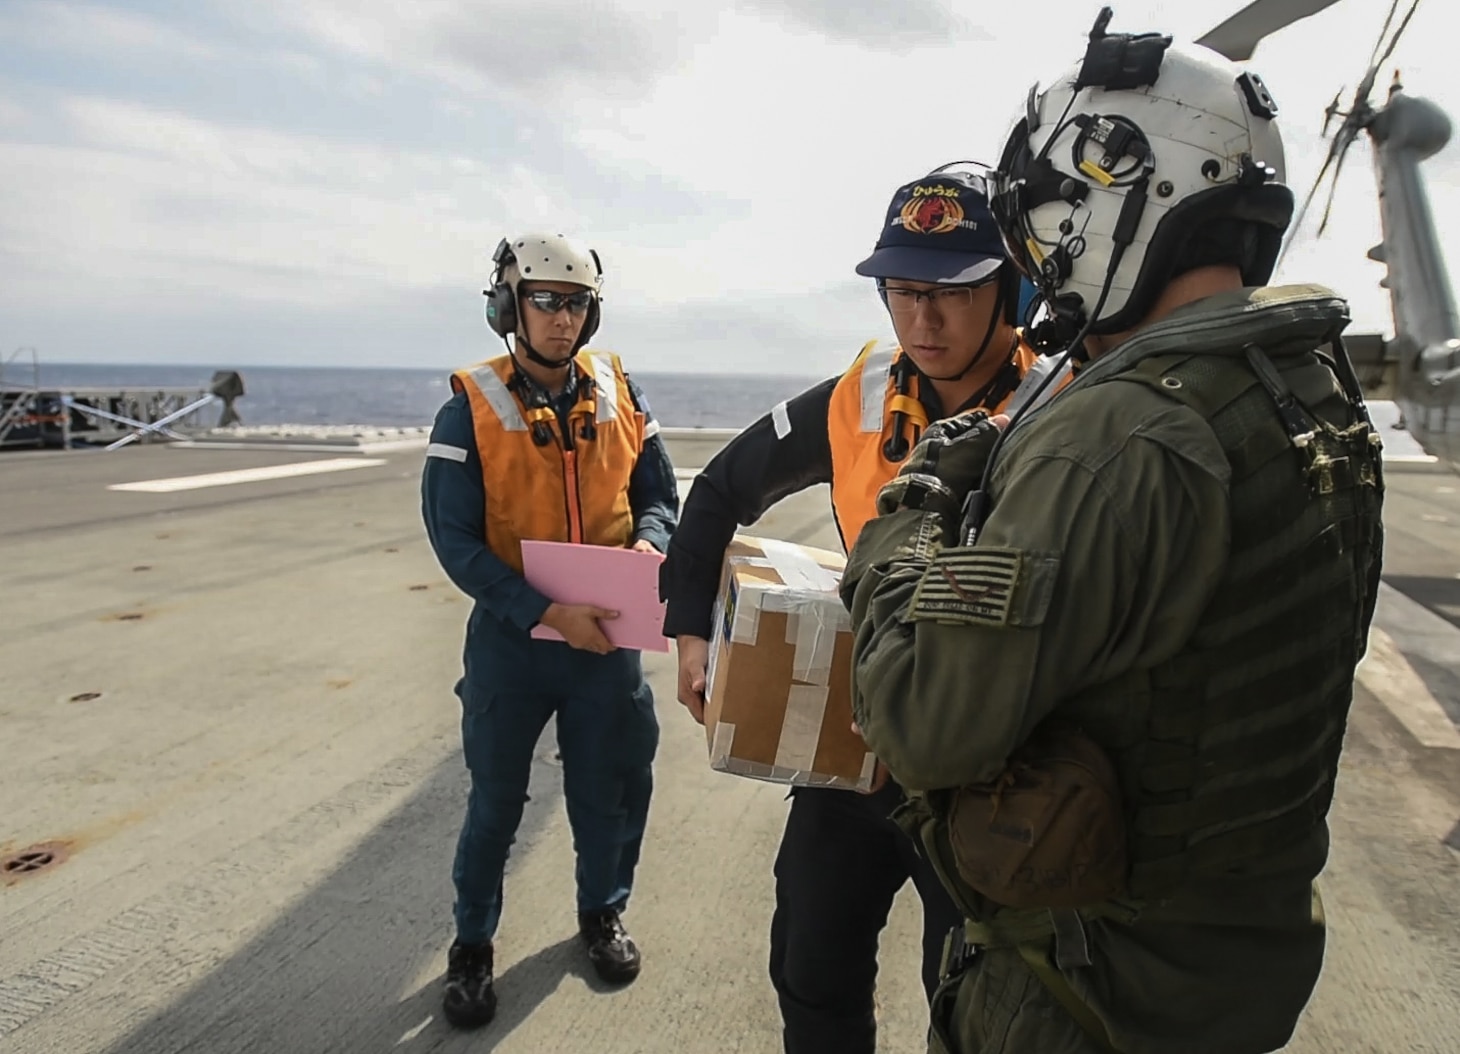 PHILIPPINE SEA (Oct. 31, 2018) Naval Aircrewman (Helicopter) 2nd Class Ryan Quinn, assigned to Helicopter Maritime Strike Squadron (HSM) 77, delivers a repair part to the Japan Maritime Self-Defense Force ship JS Huyuga (DDH-181) for an Acquisition and Cross Servicing Agreement Logistics Exchange during Keen Sword 19. Keen Sword 19 is a joint, bilateral field-training exercise involving U.S. military and Japan Maritime Self-Defense Force personnel, designed to increase combat readiness and interoperability of the Japan-U.S. alliance.